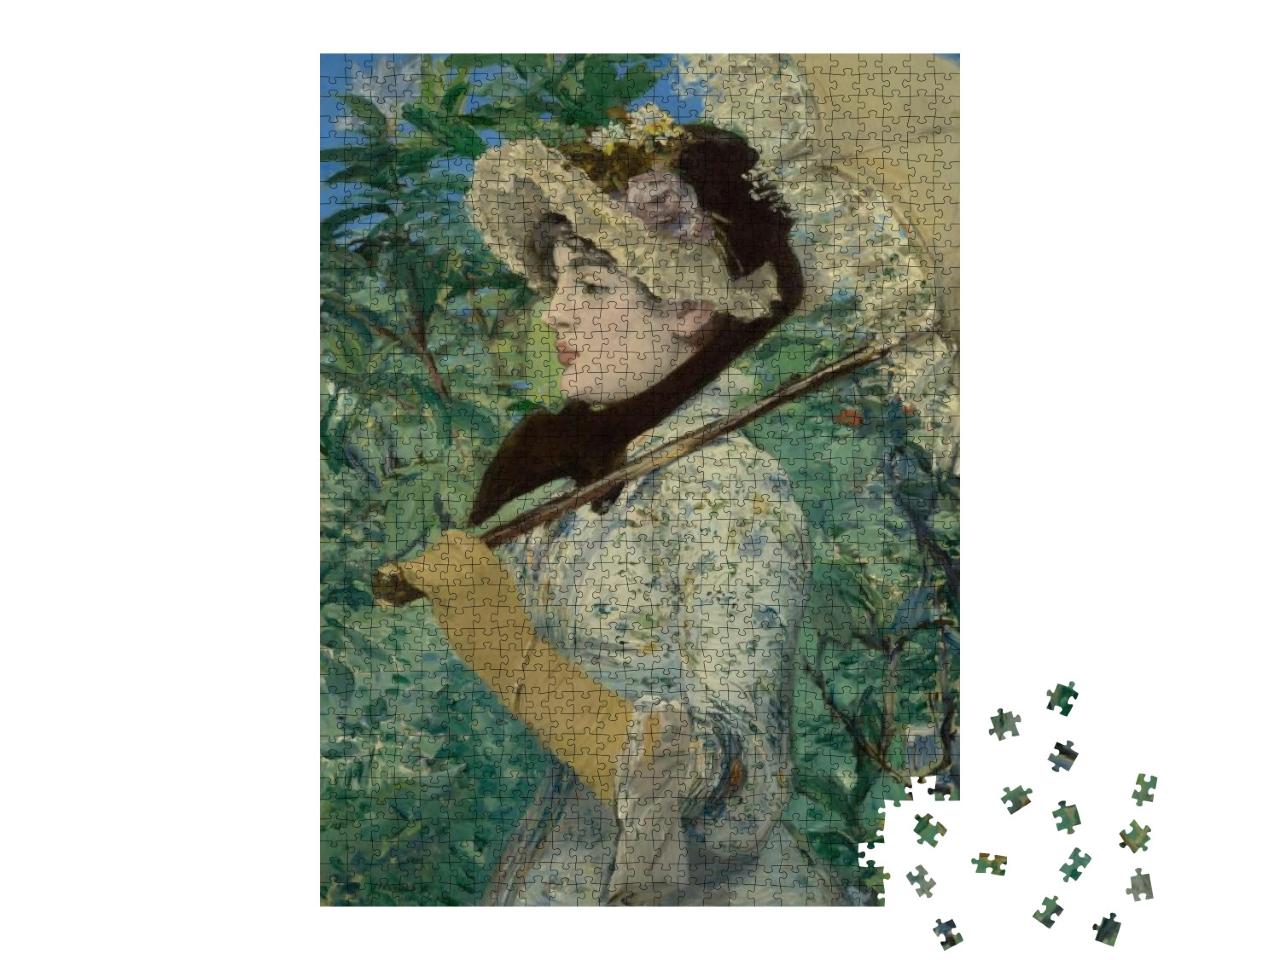 Jeanne Spring, by Edouard Manet, 1881, French Painting, O... Jigsaw Puzzle with 1000 pieces